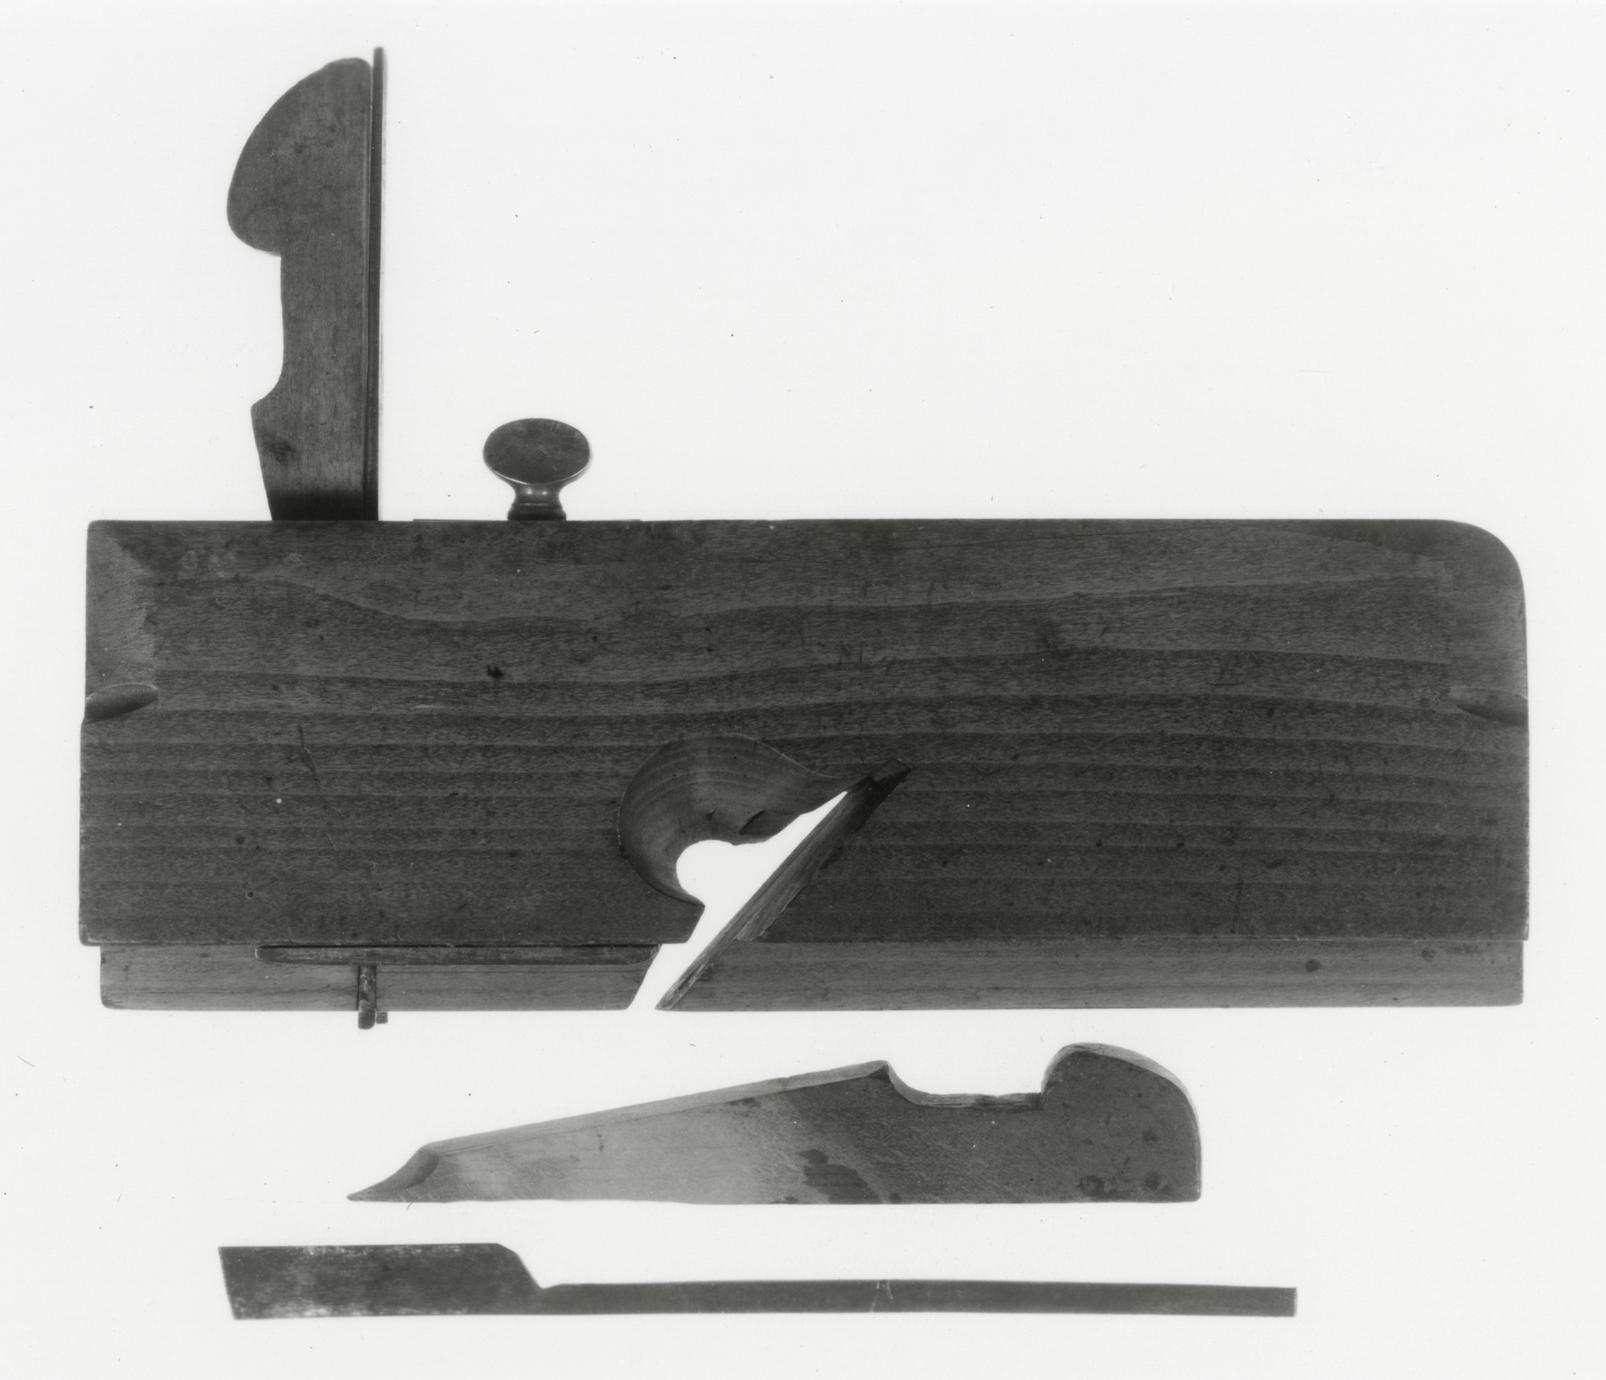 Black and white photo of a side or dado rabbet plane.